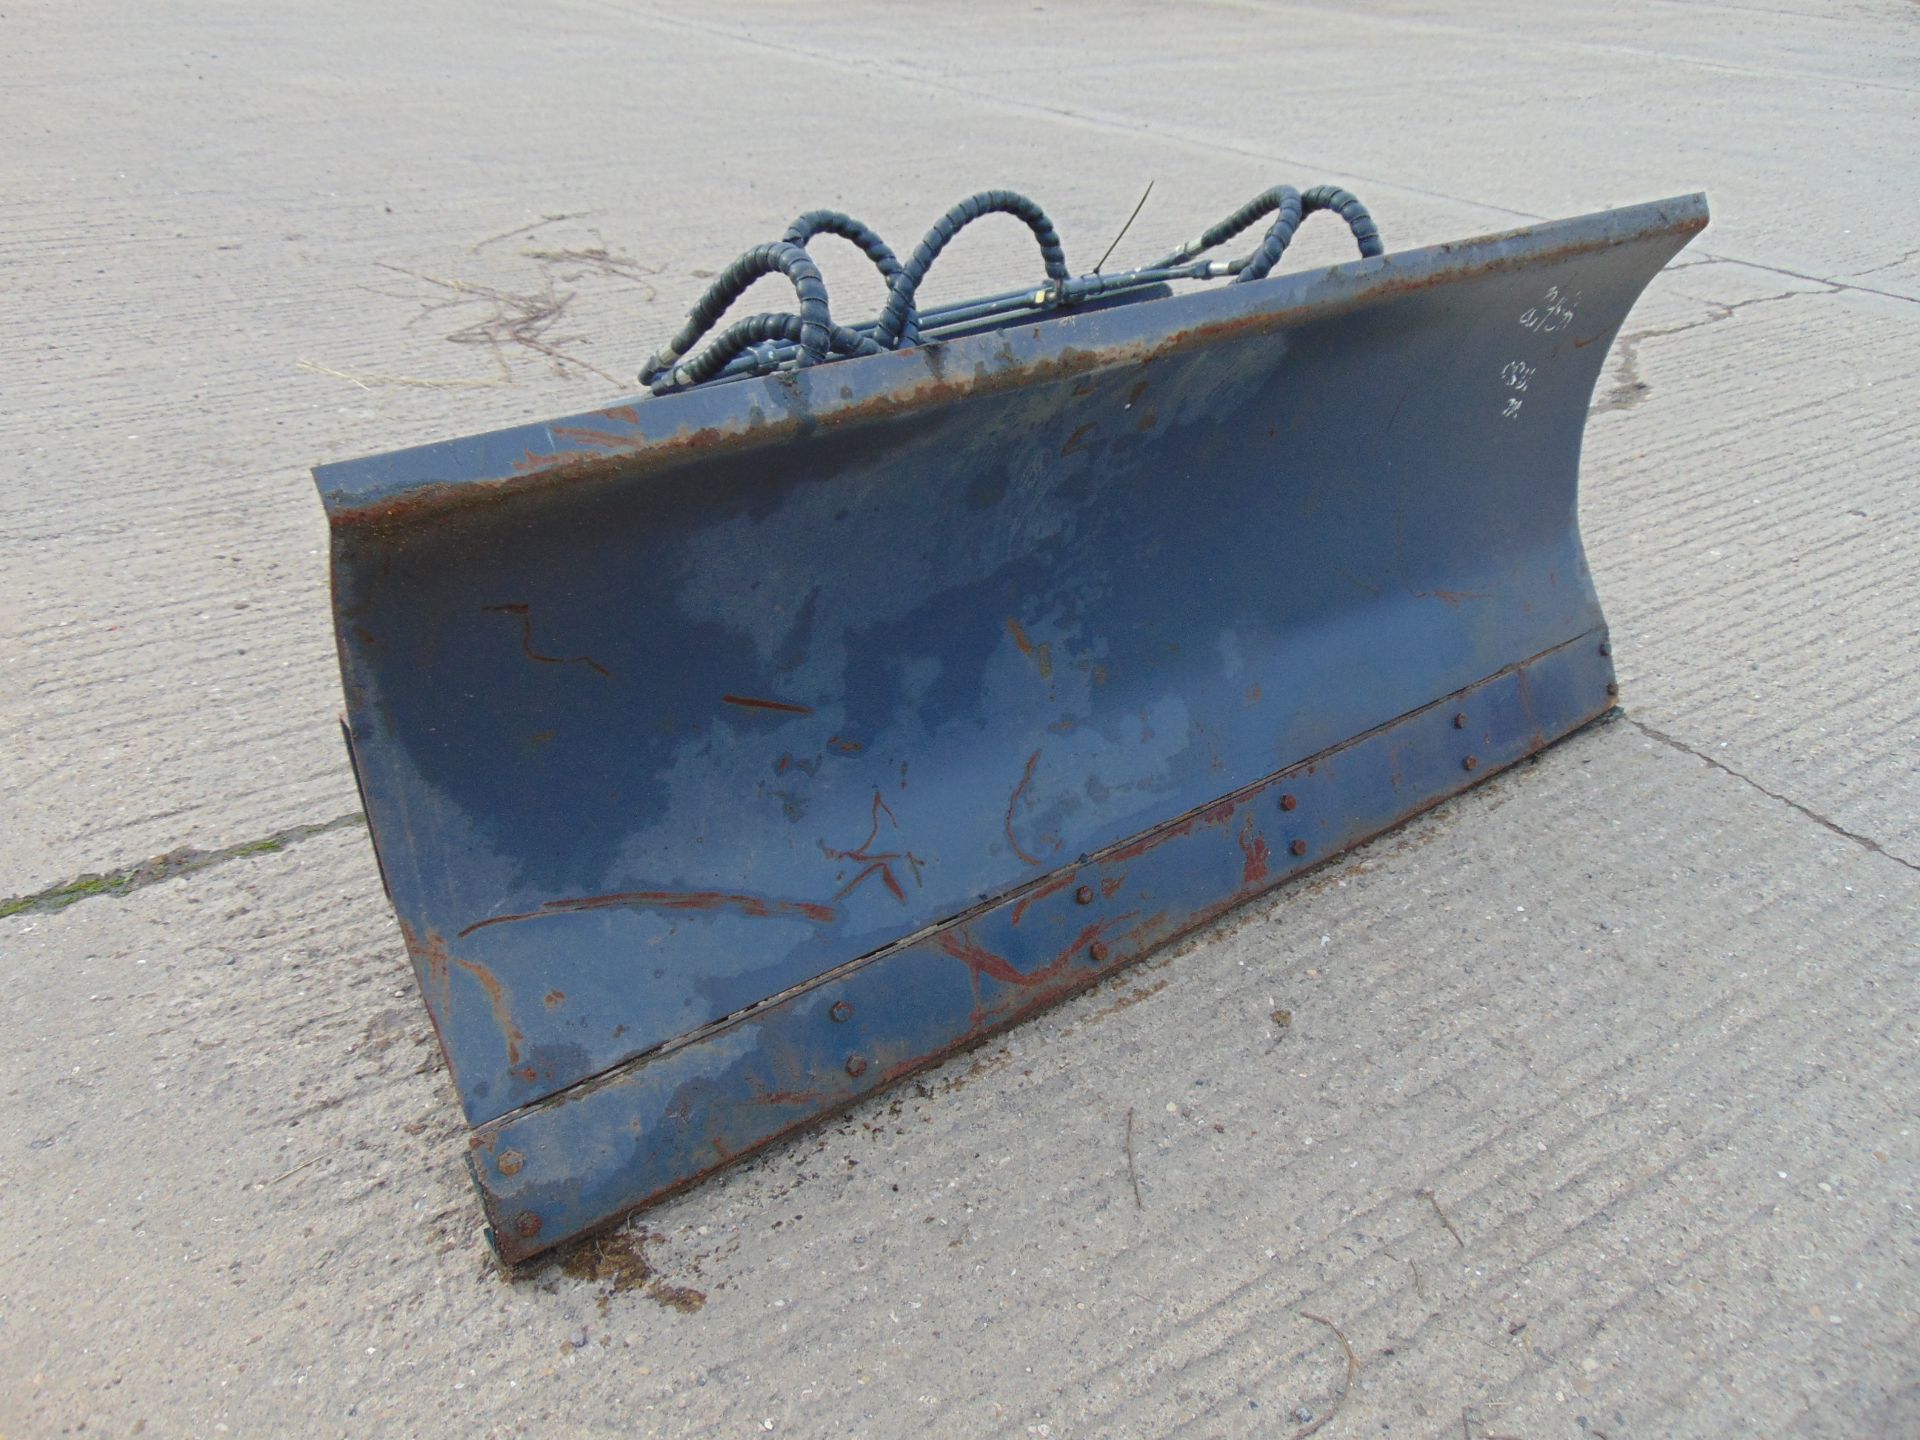 6' Hydraulic Snow Plough Blade for Telehandler, Forklift, Tractor Etc